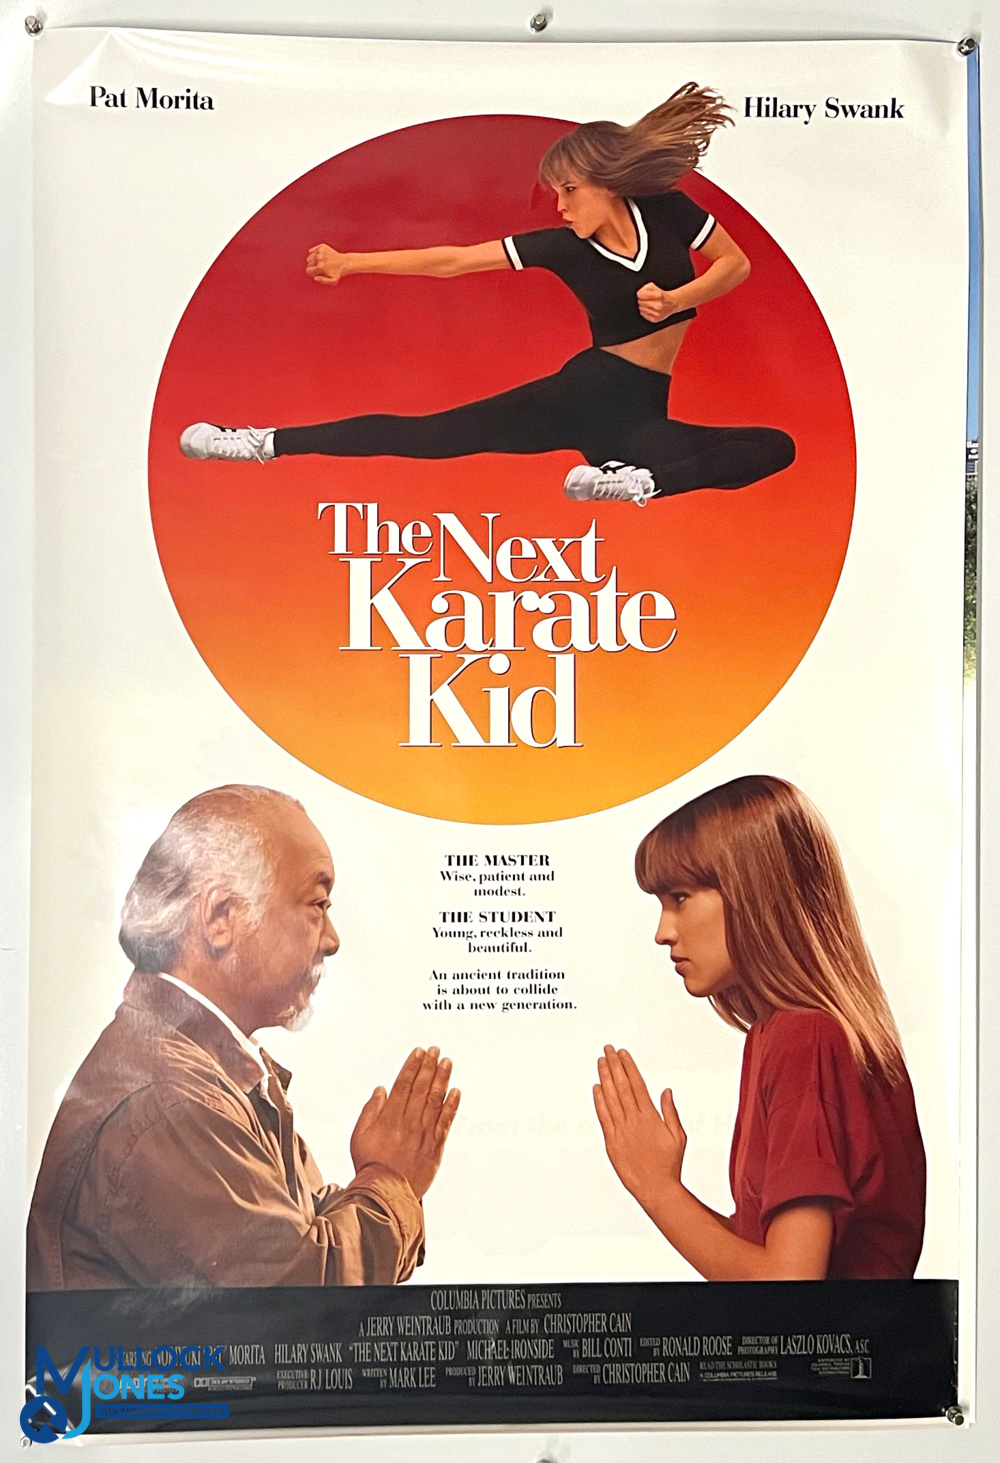 Original Movie/Film Posters (5) - 1993 Mr Jones, 1994 Baby’s Day Out, 1994 The Next Karate Kid, 1994 - Image 2 of 4